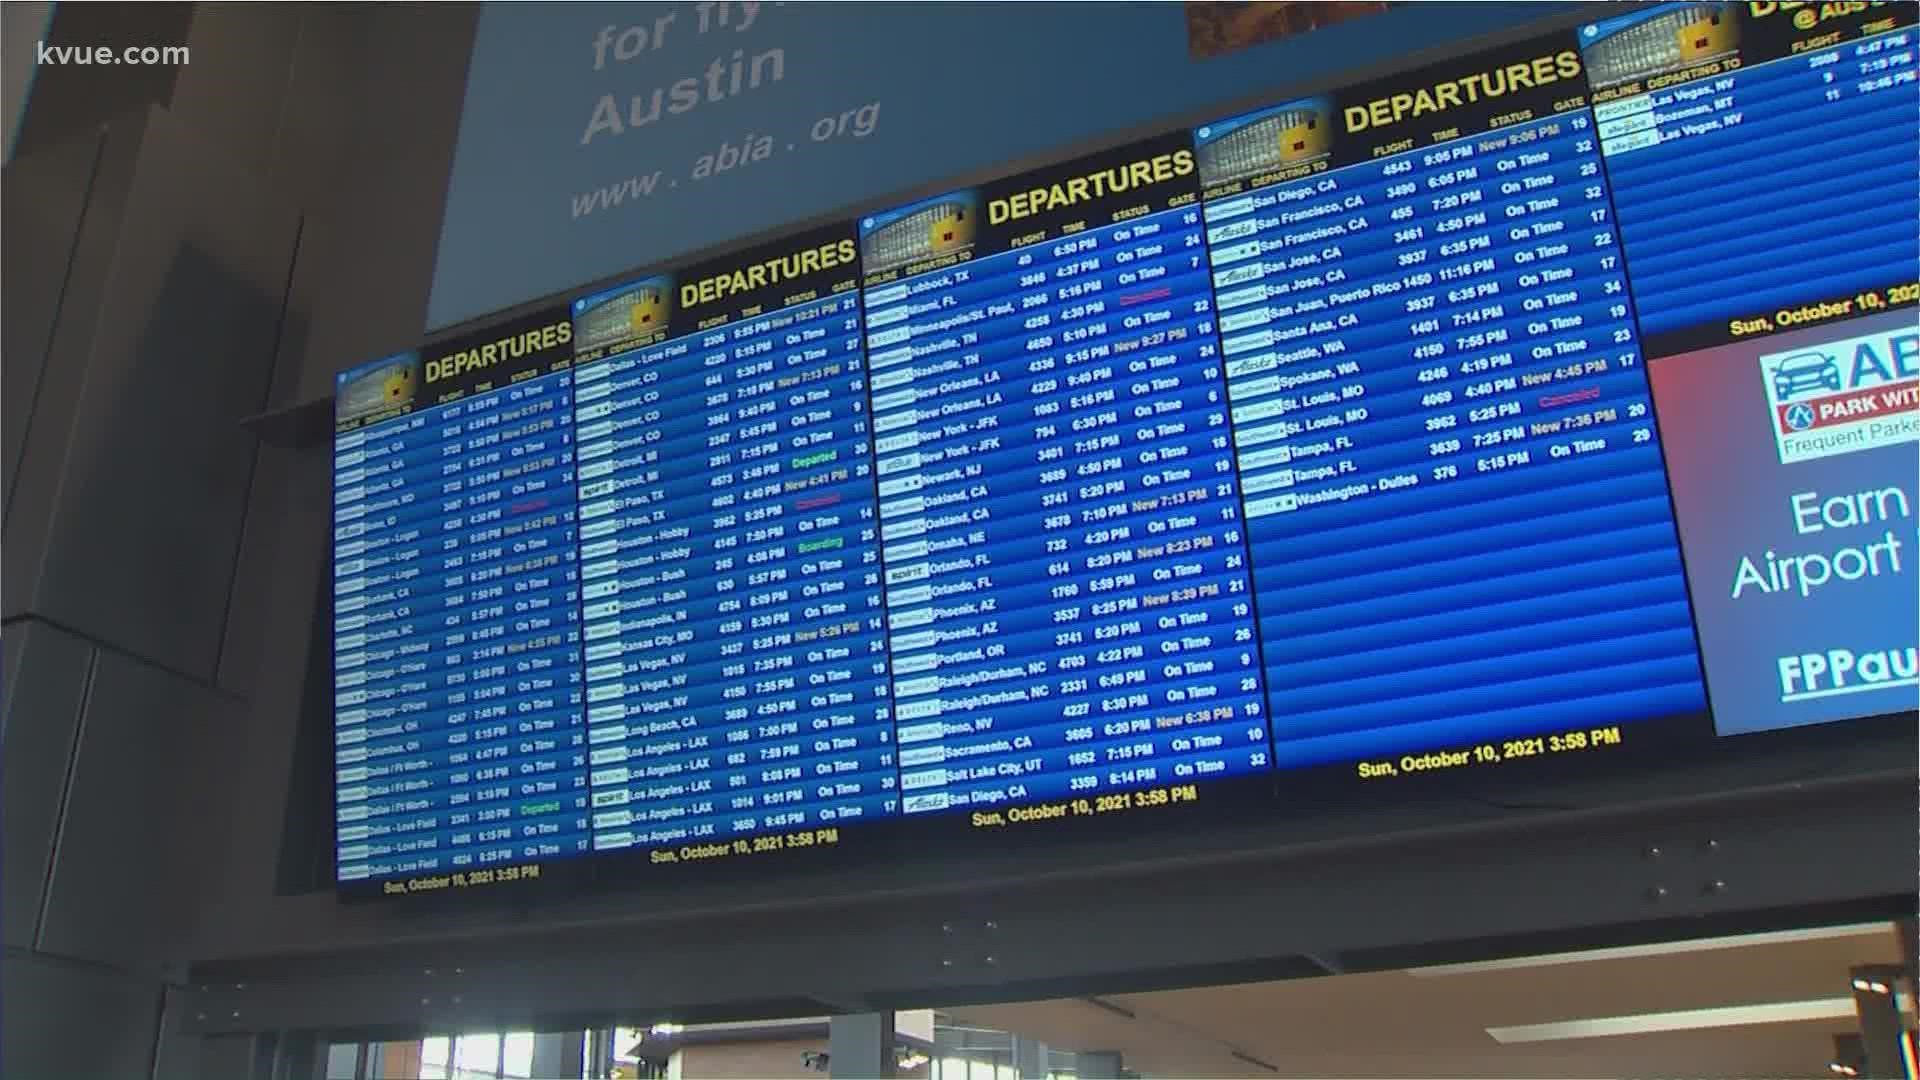 Officials said the Austin airport will be busier than usual this weekend.